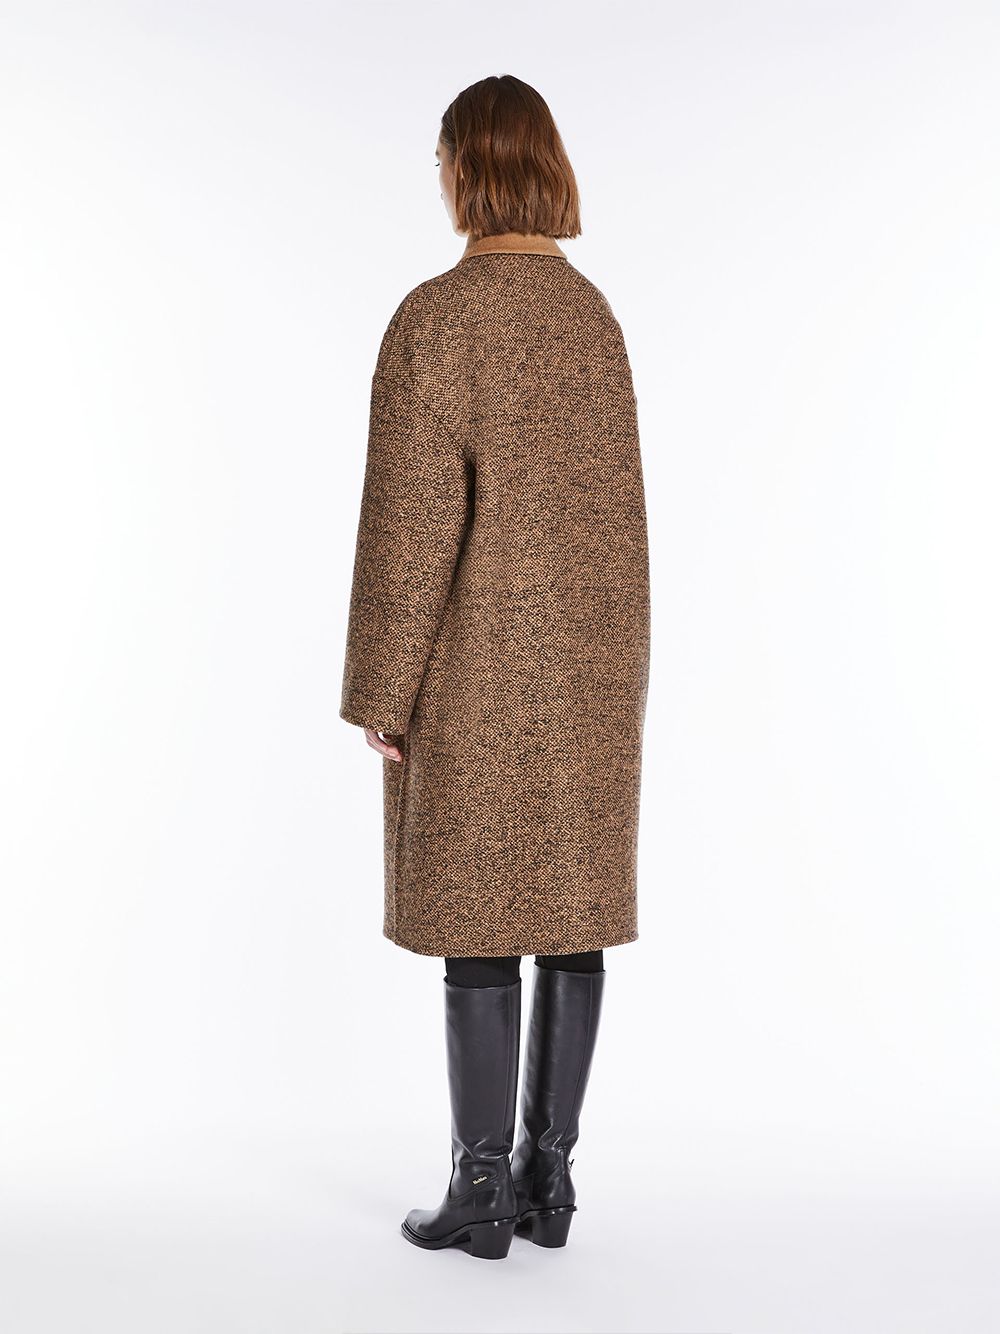 Reversible Camel and Wool Jacket for Women